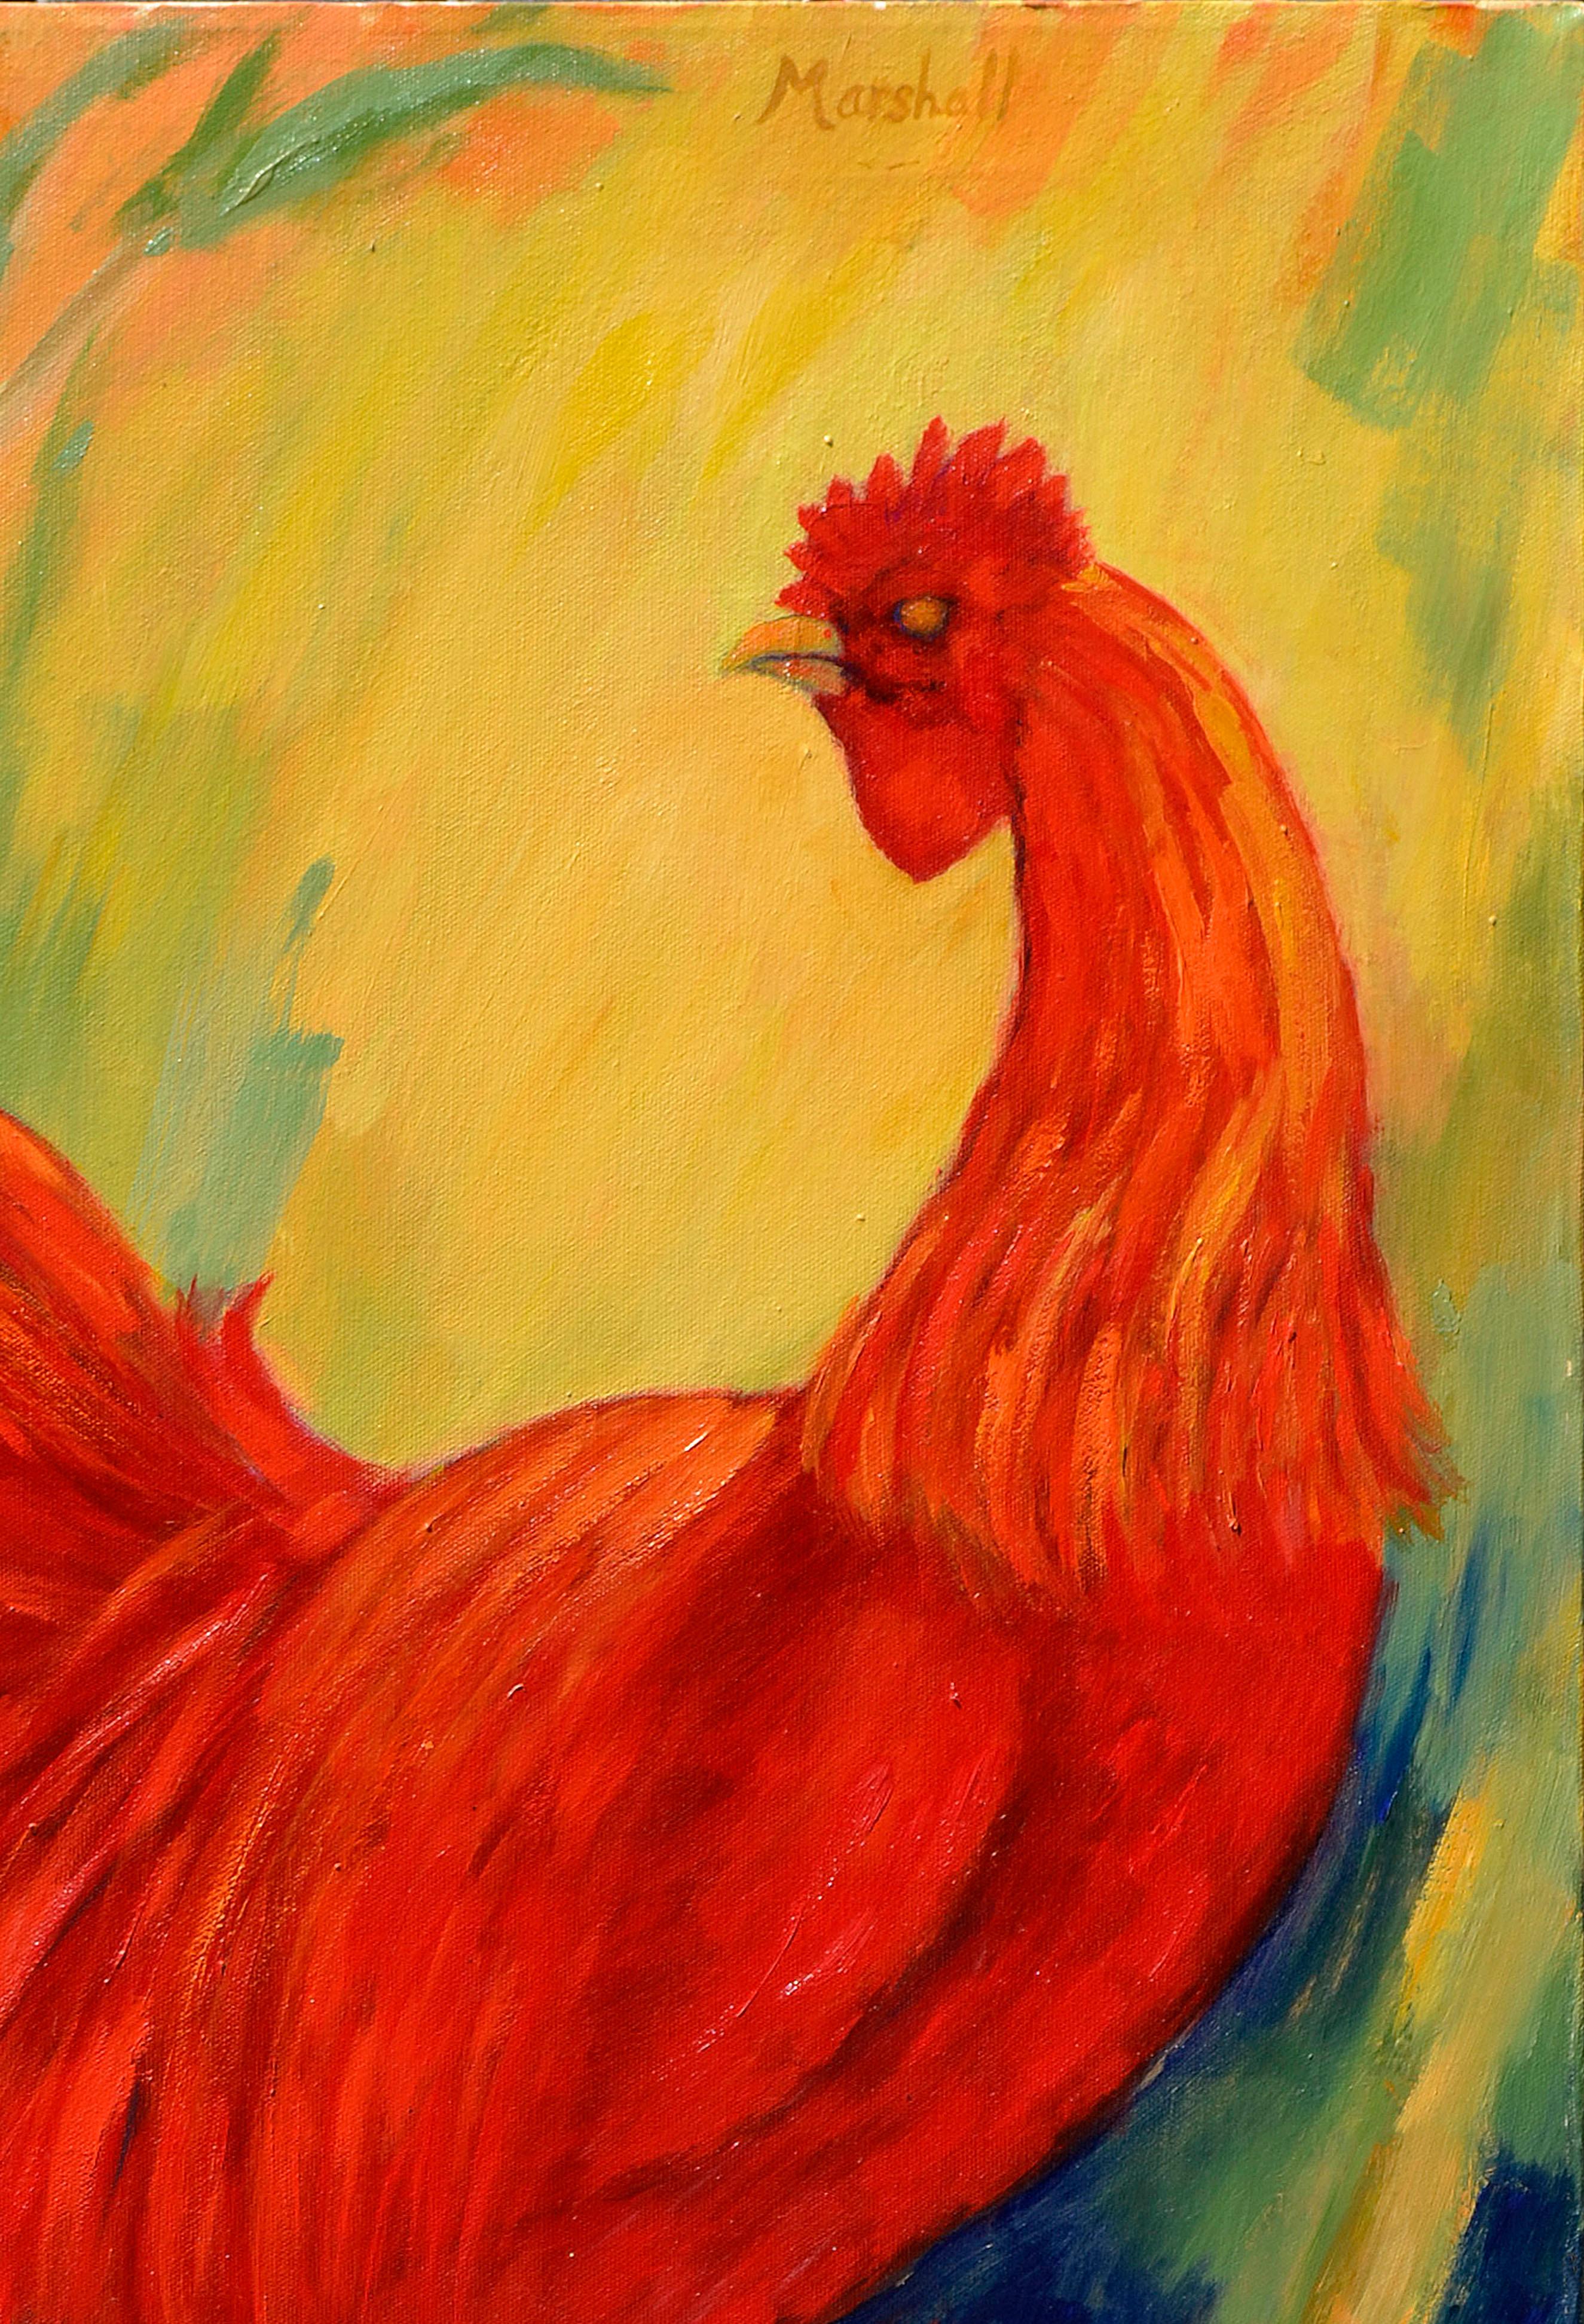 Fauvist Rooster Portrait  - Painting by Sophie D. Marshall